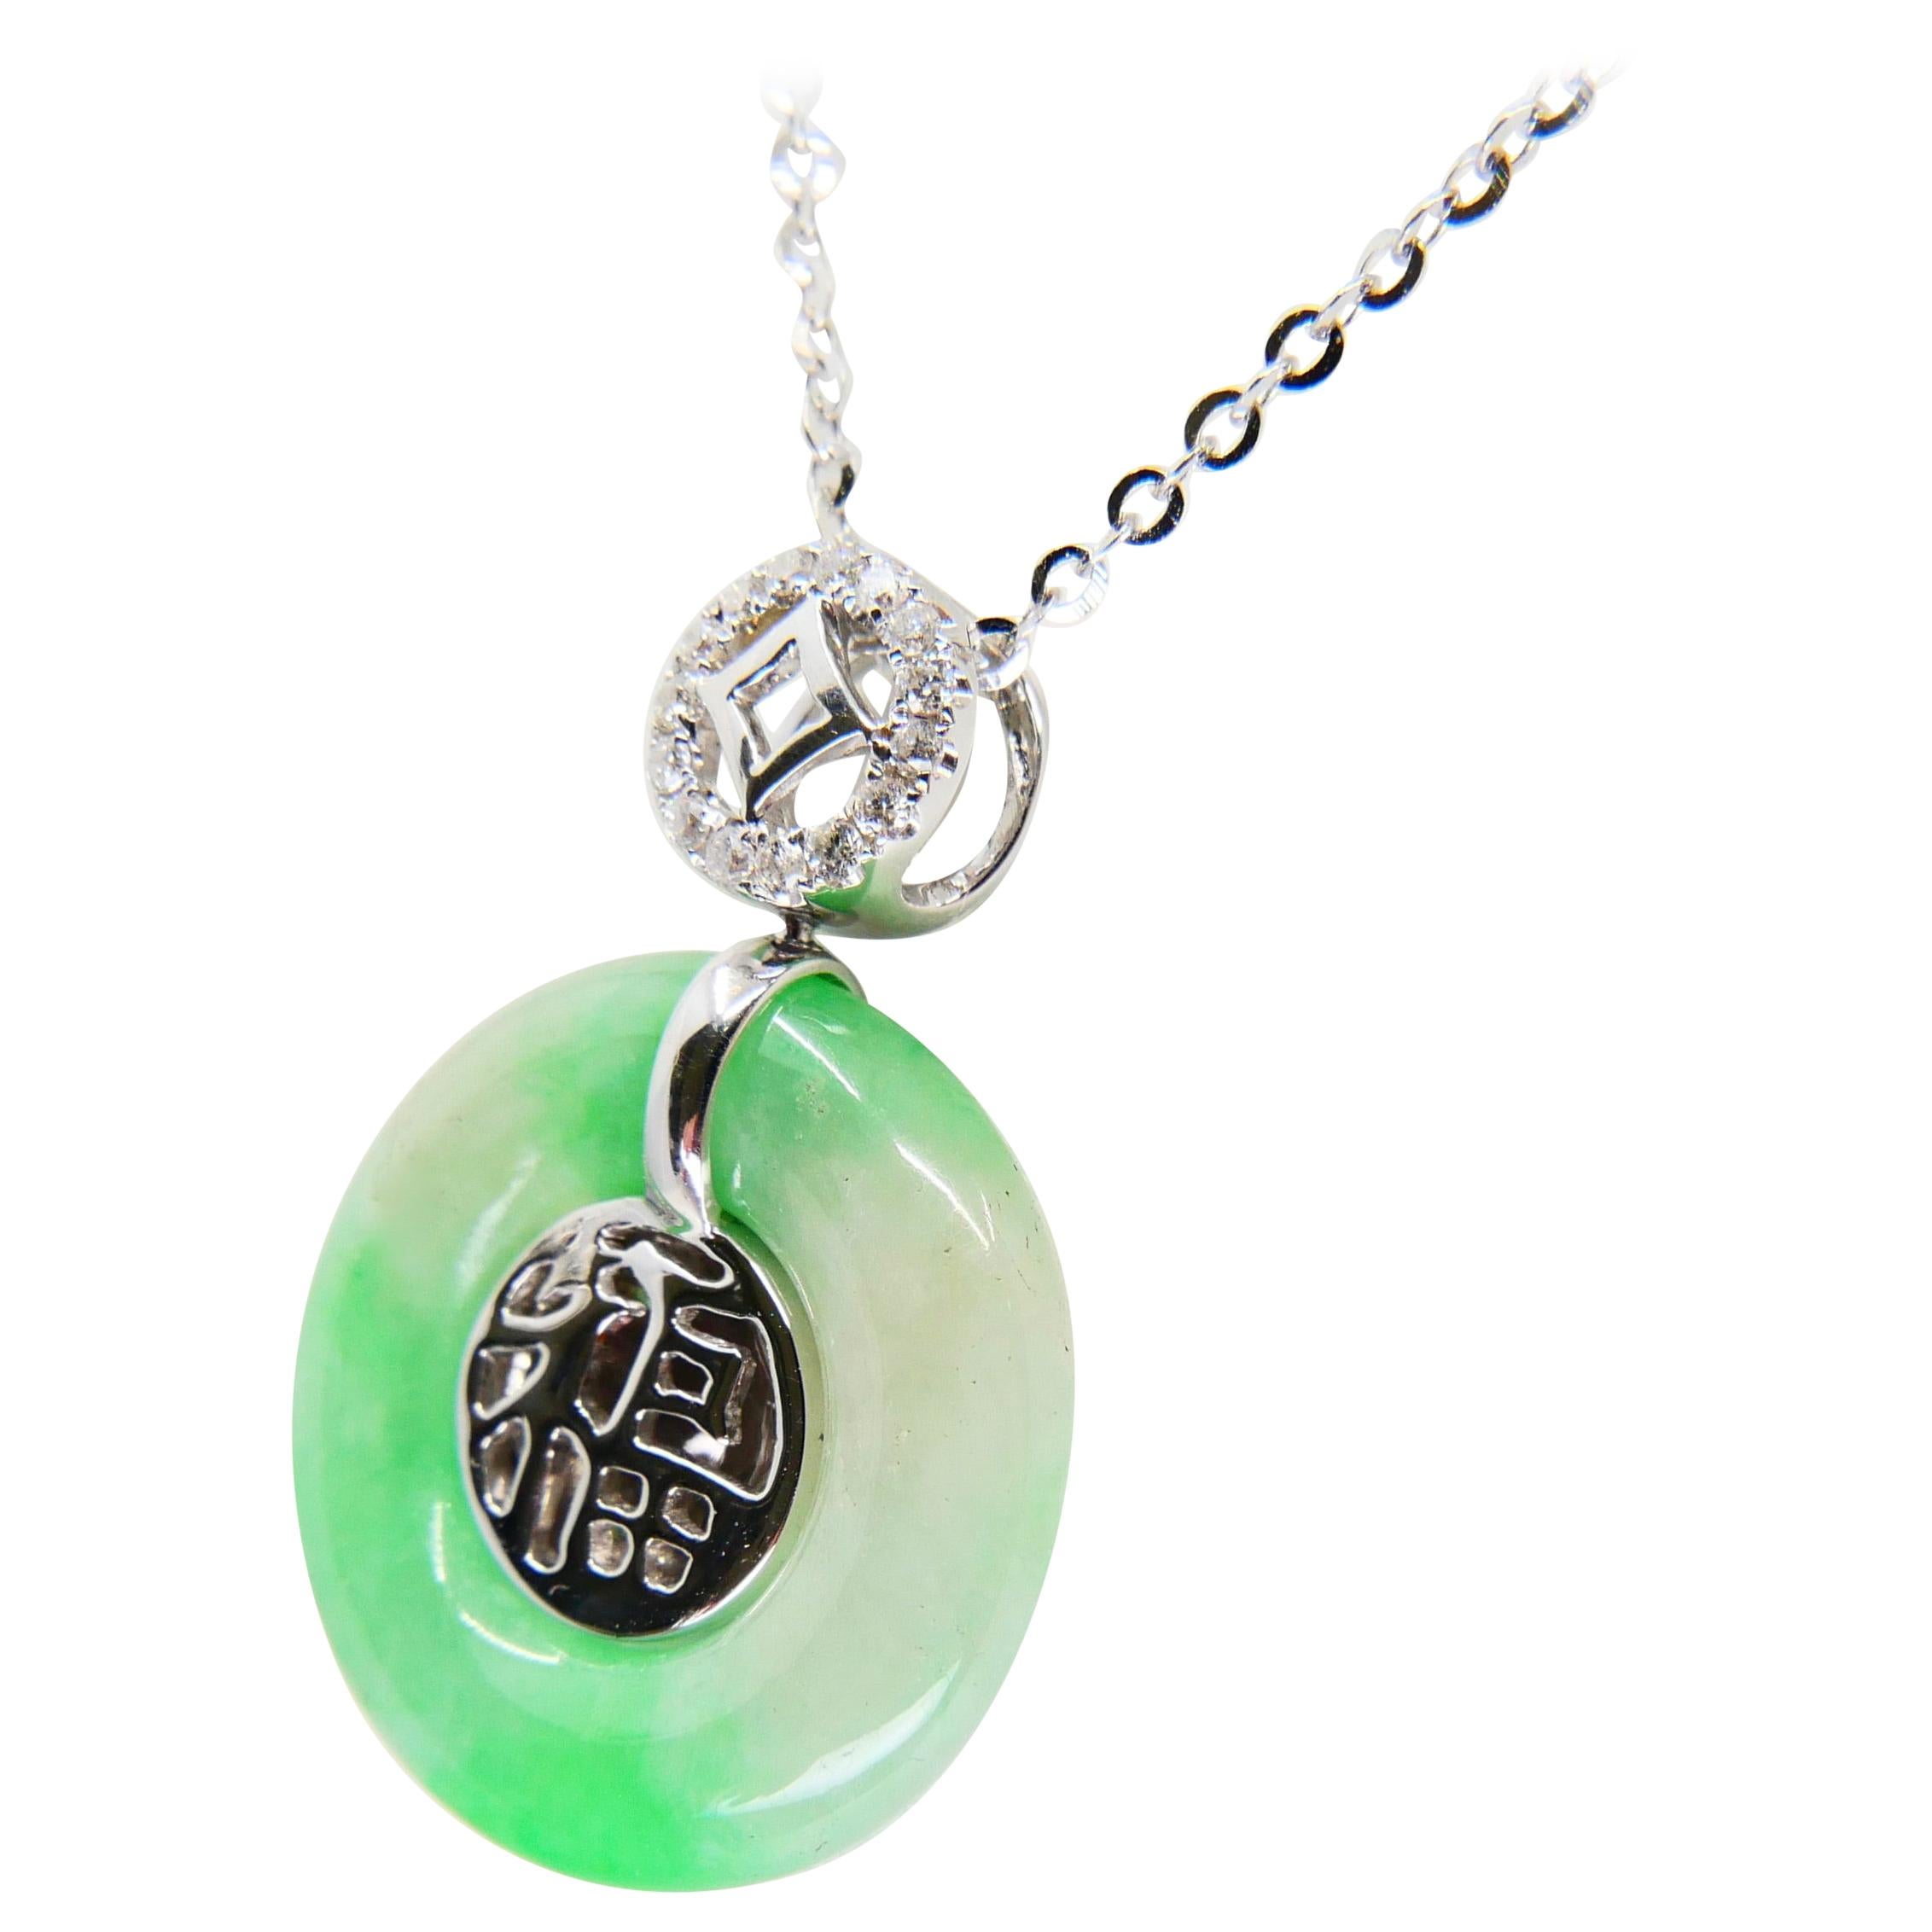 Certified Type A Jade Diamond Pendant Necklace, Apple Green Patches, Reversible